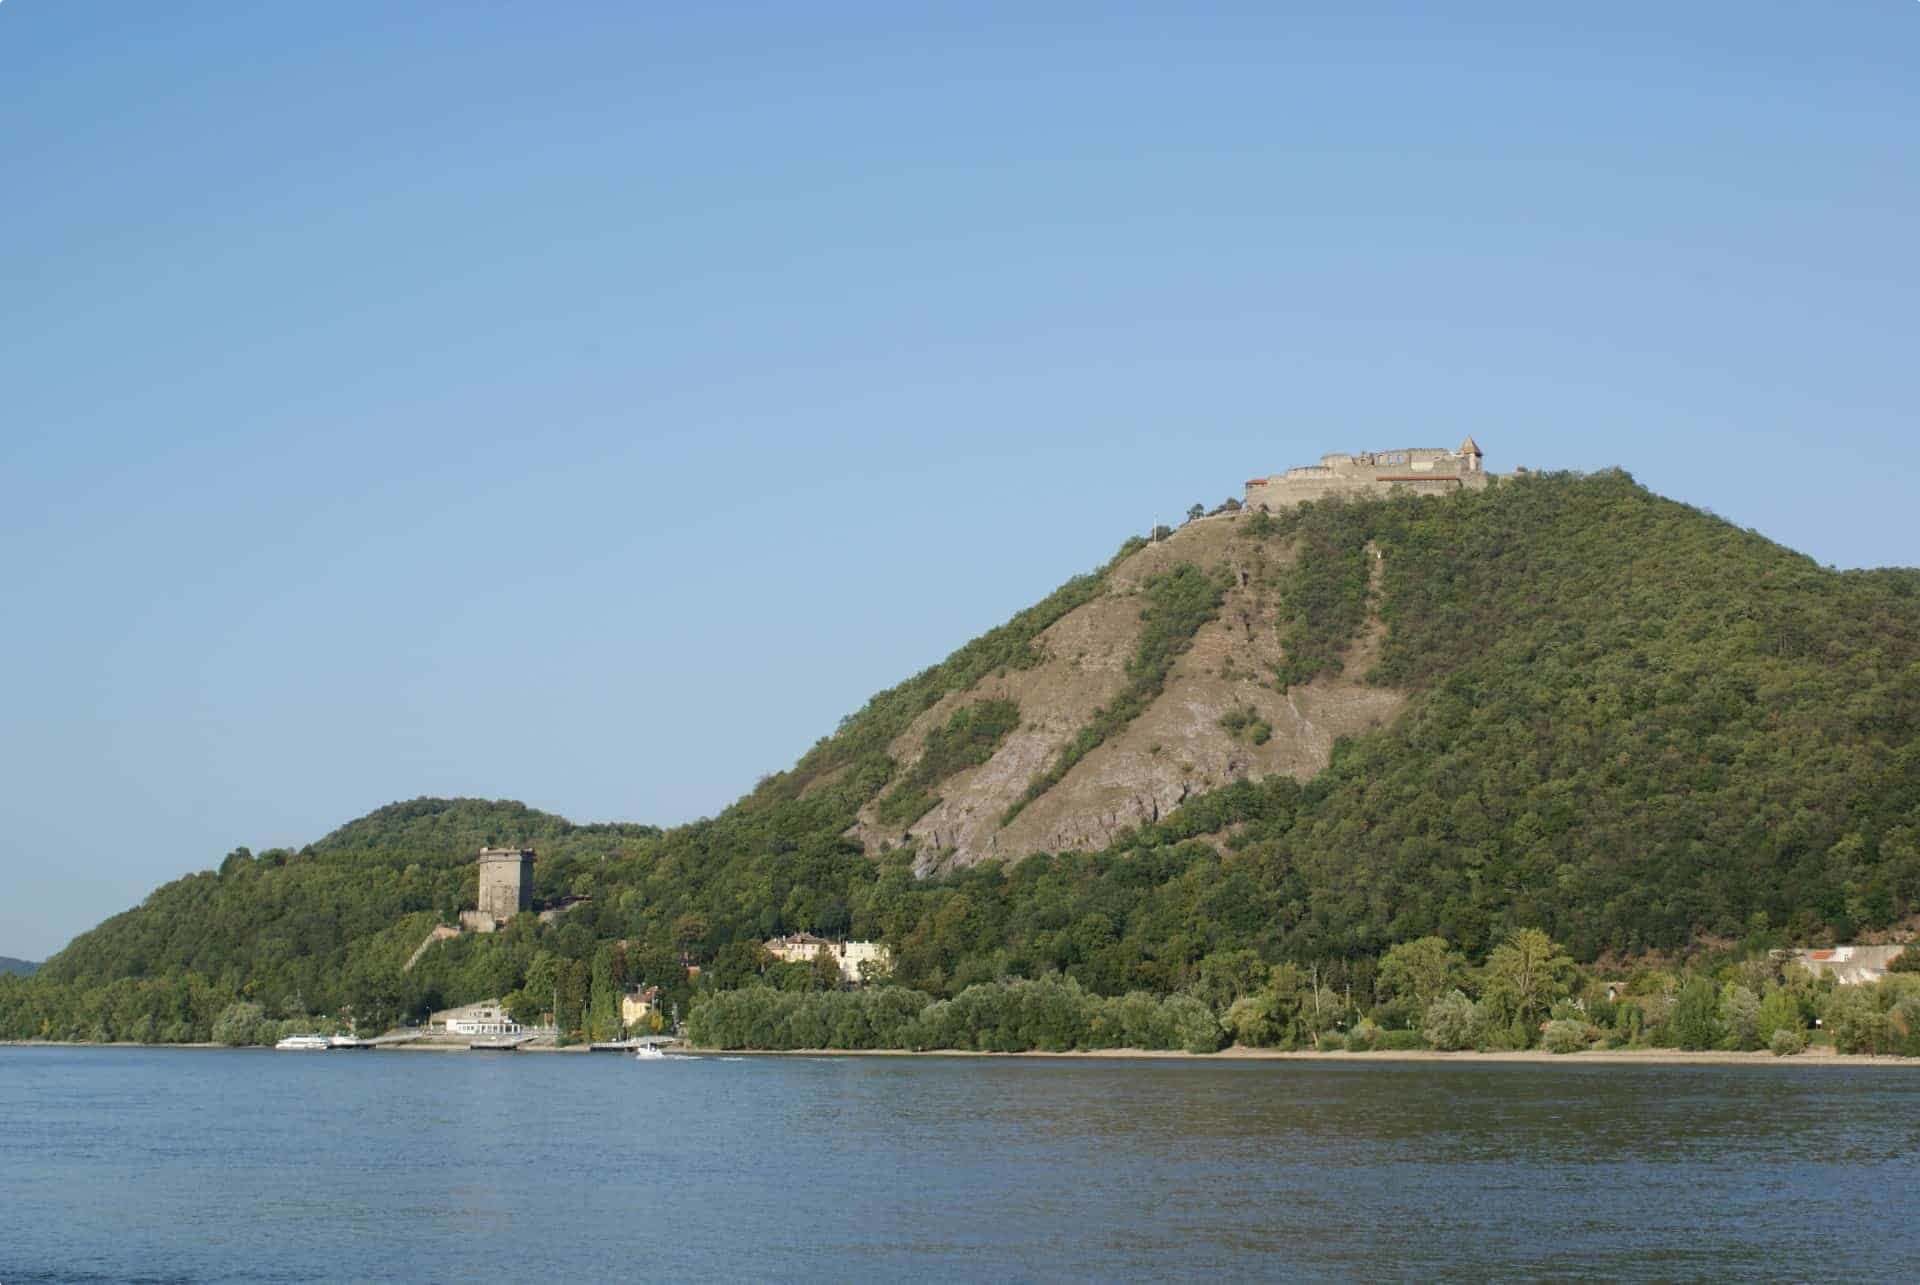 The remains of the castle and citadel in Visegrad